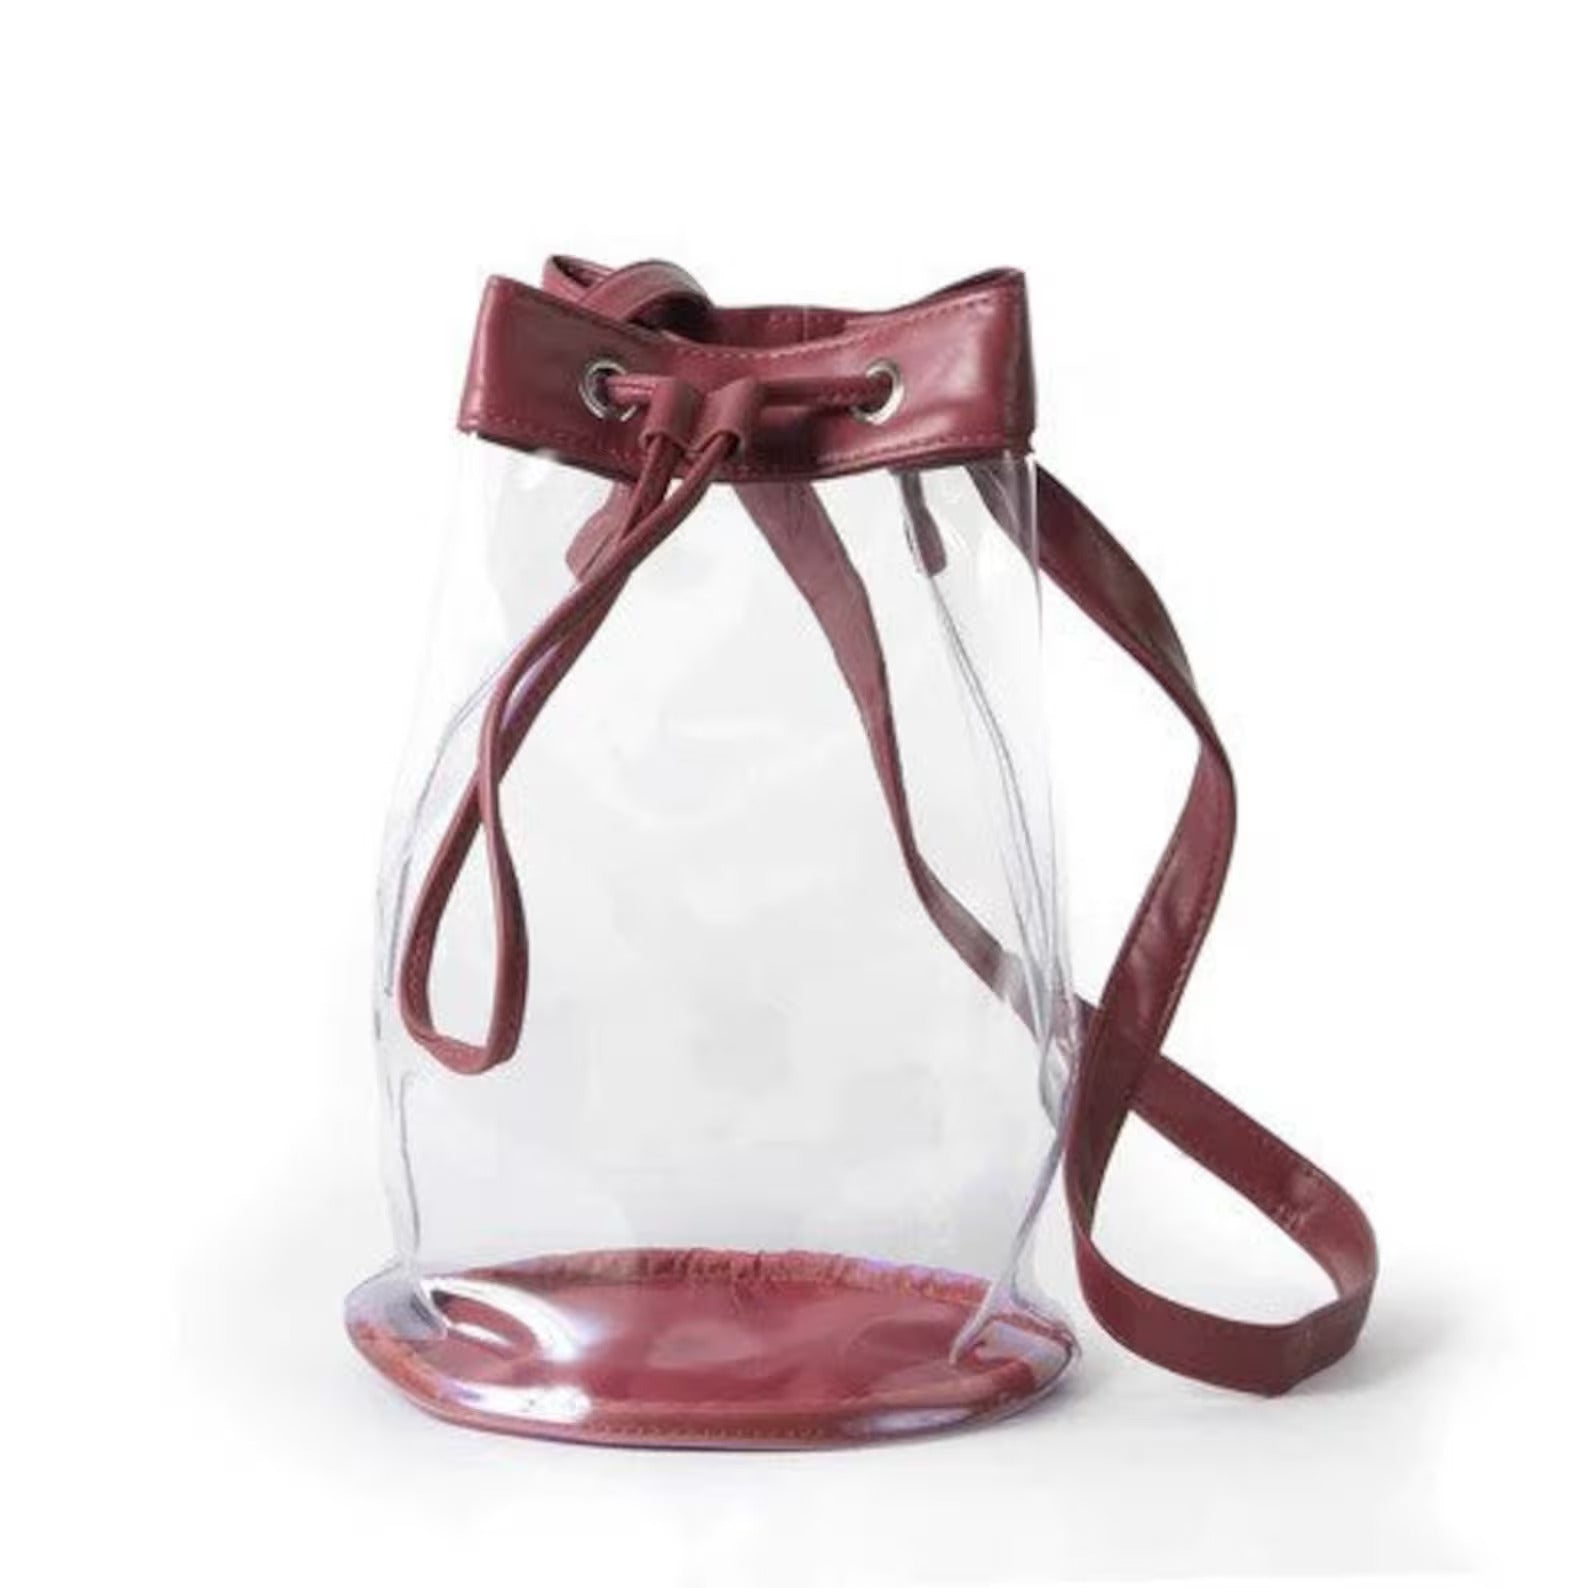 Stadium Approved Clear Bucket Bag - Maroon Trim